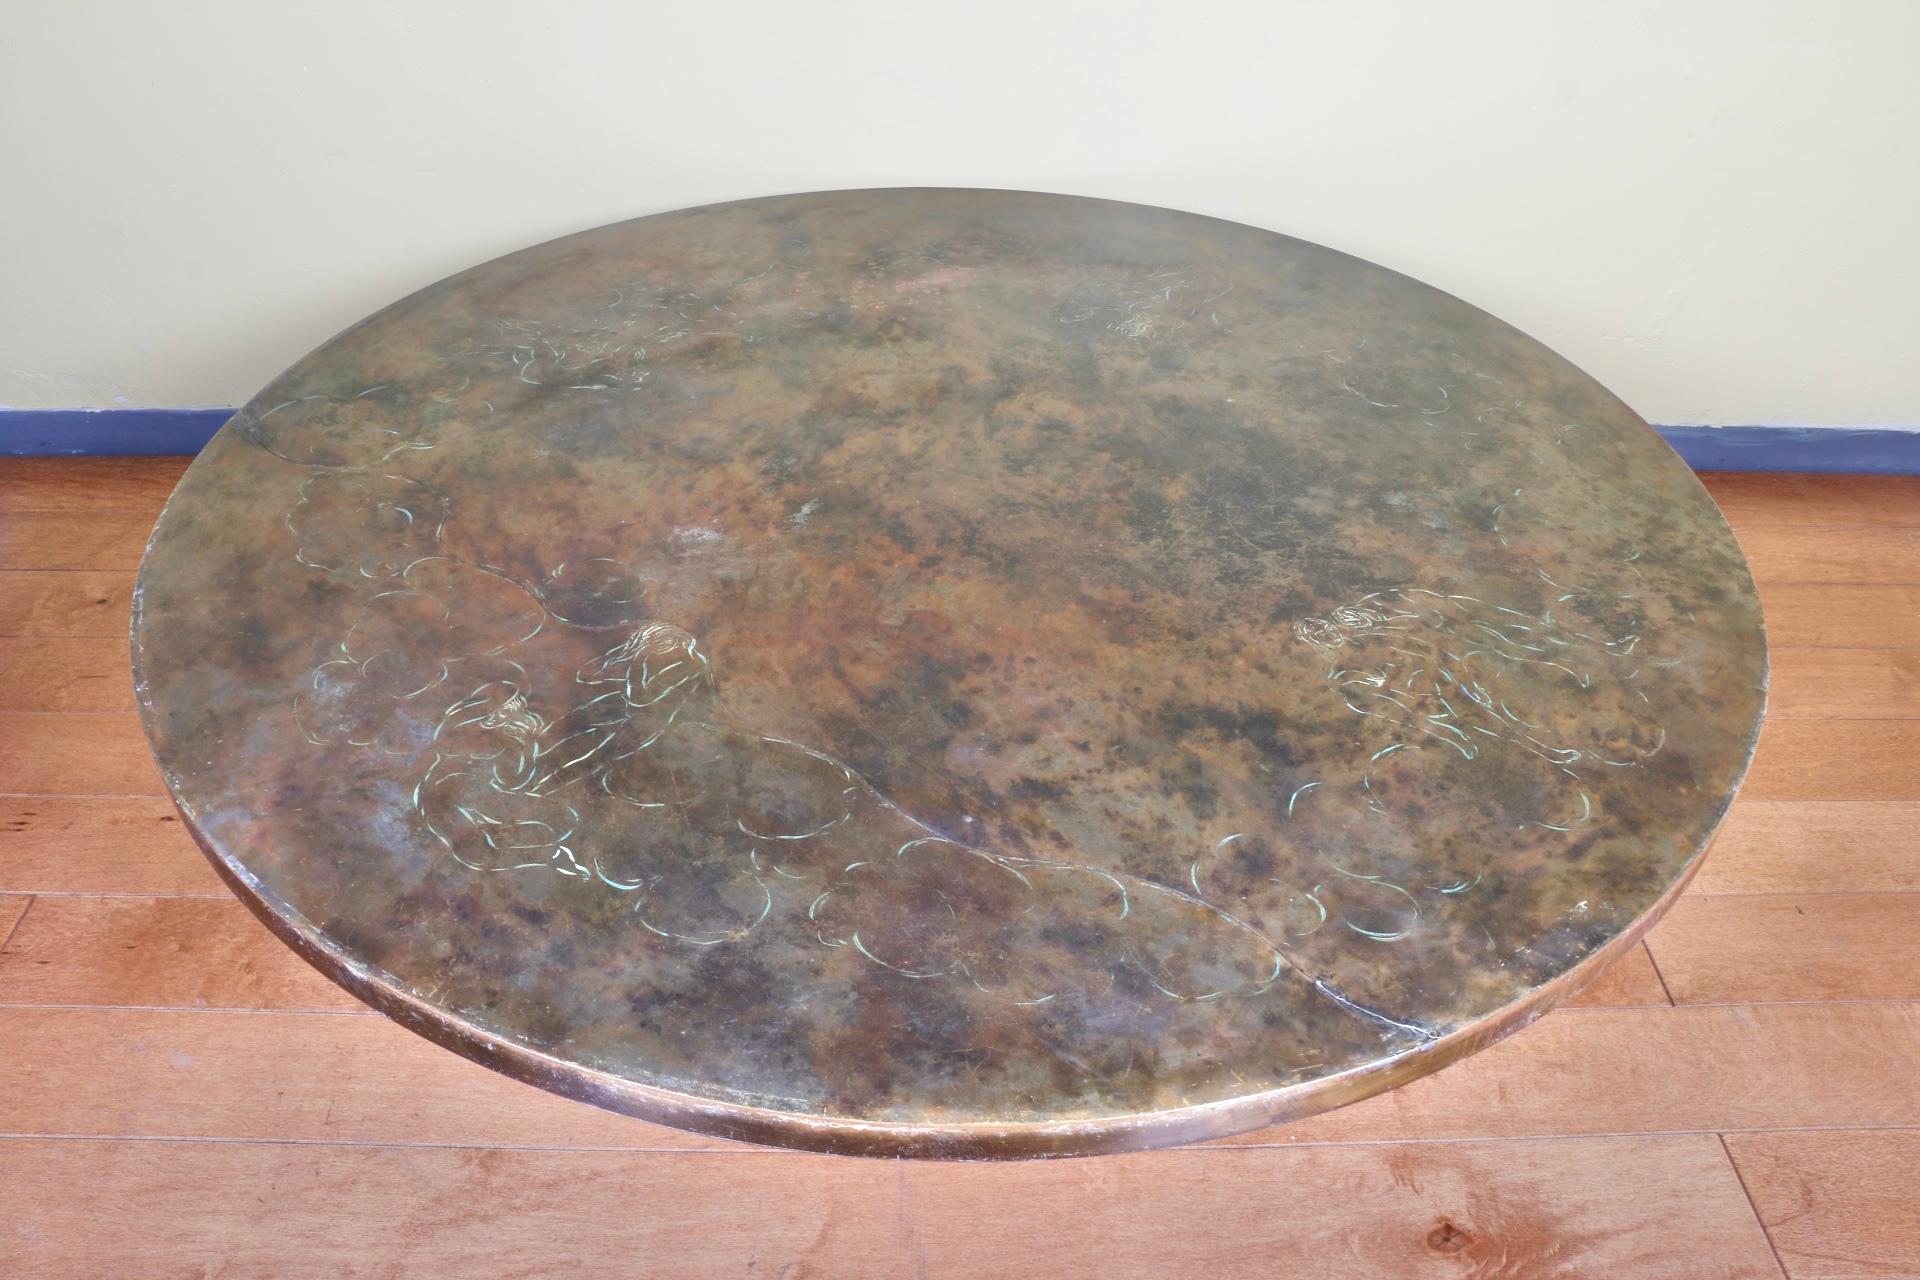 Exceptional Philip La Verne Signed Bronze patina coffee table with detailed carved top. Adam and Eve “creation” 
Gorgeous design and style. Amazing table that took about 6 years to make. Real work of art. Great for any home.